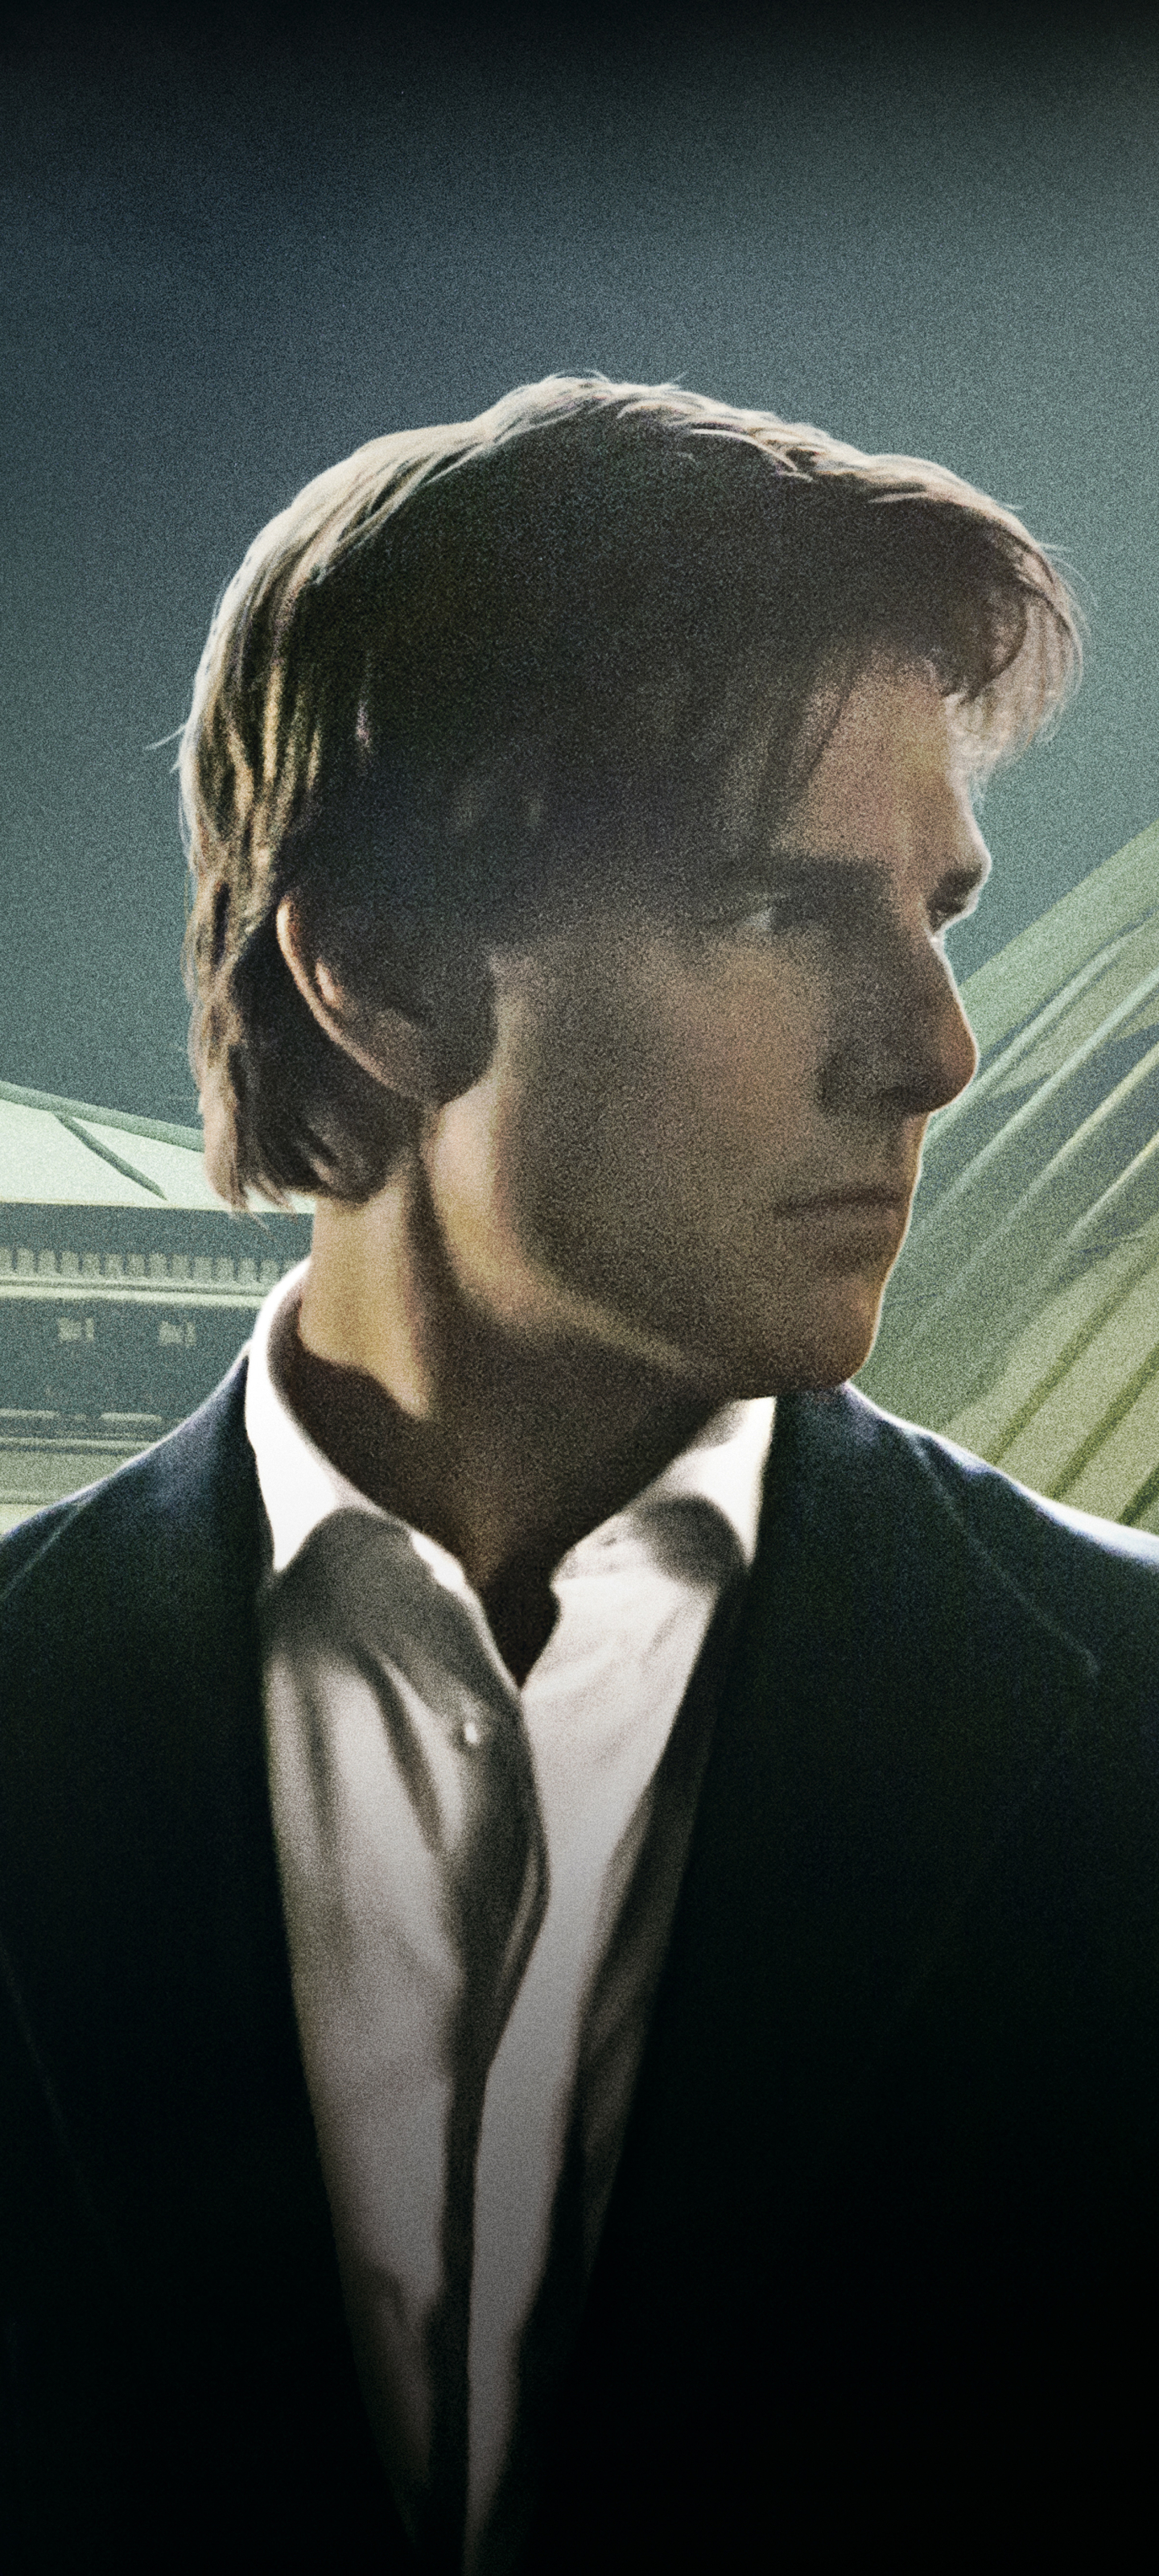 Mission: Impossible - Rogue Nation Phone Wallpaper